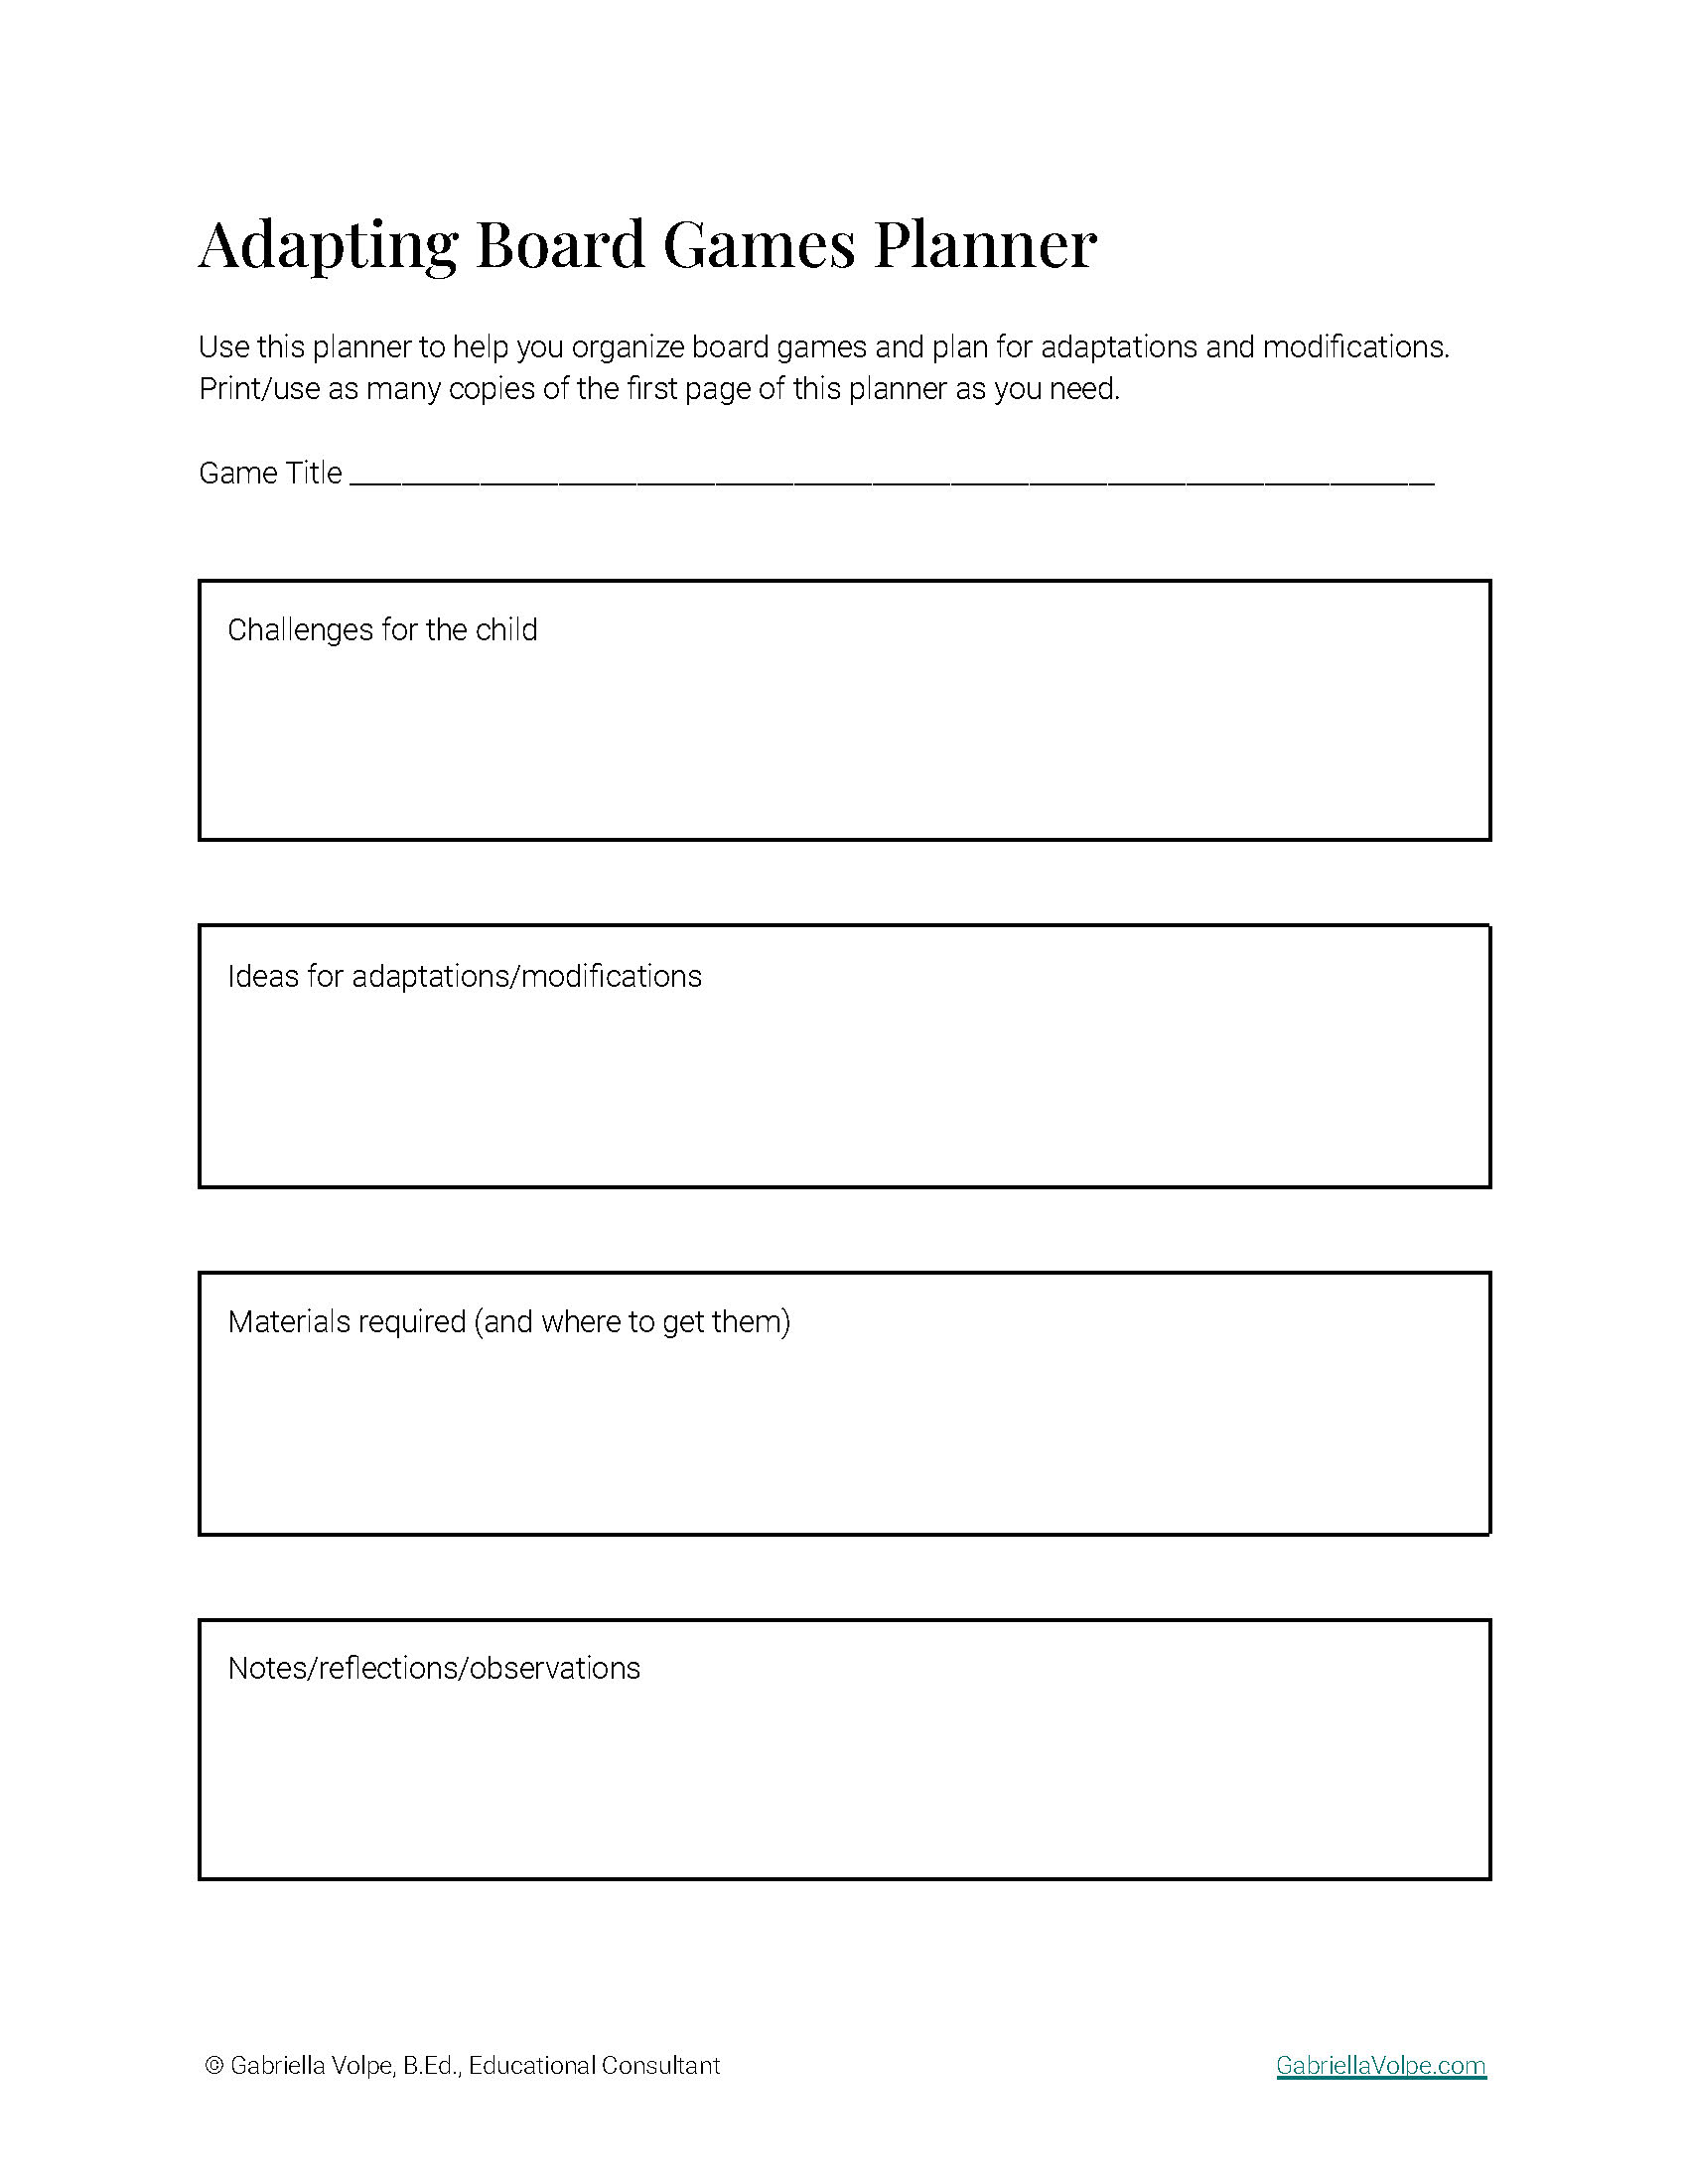 Adapting Games Planner PDF page 2